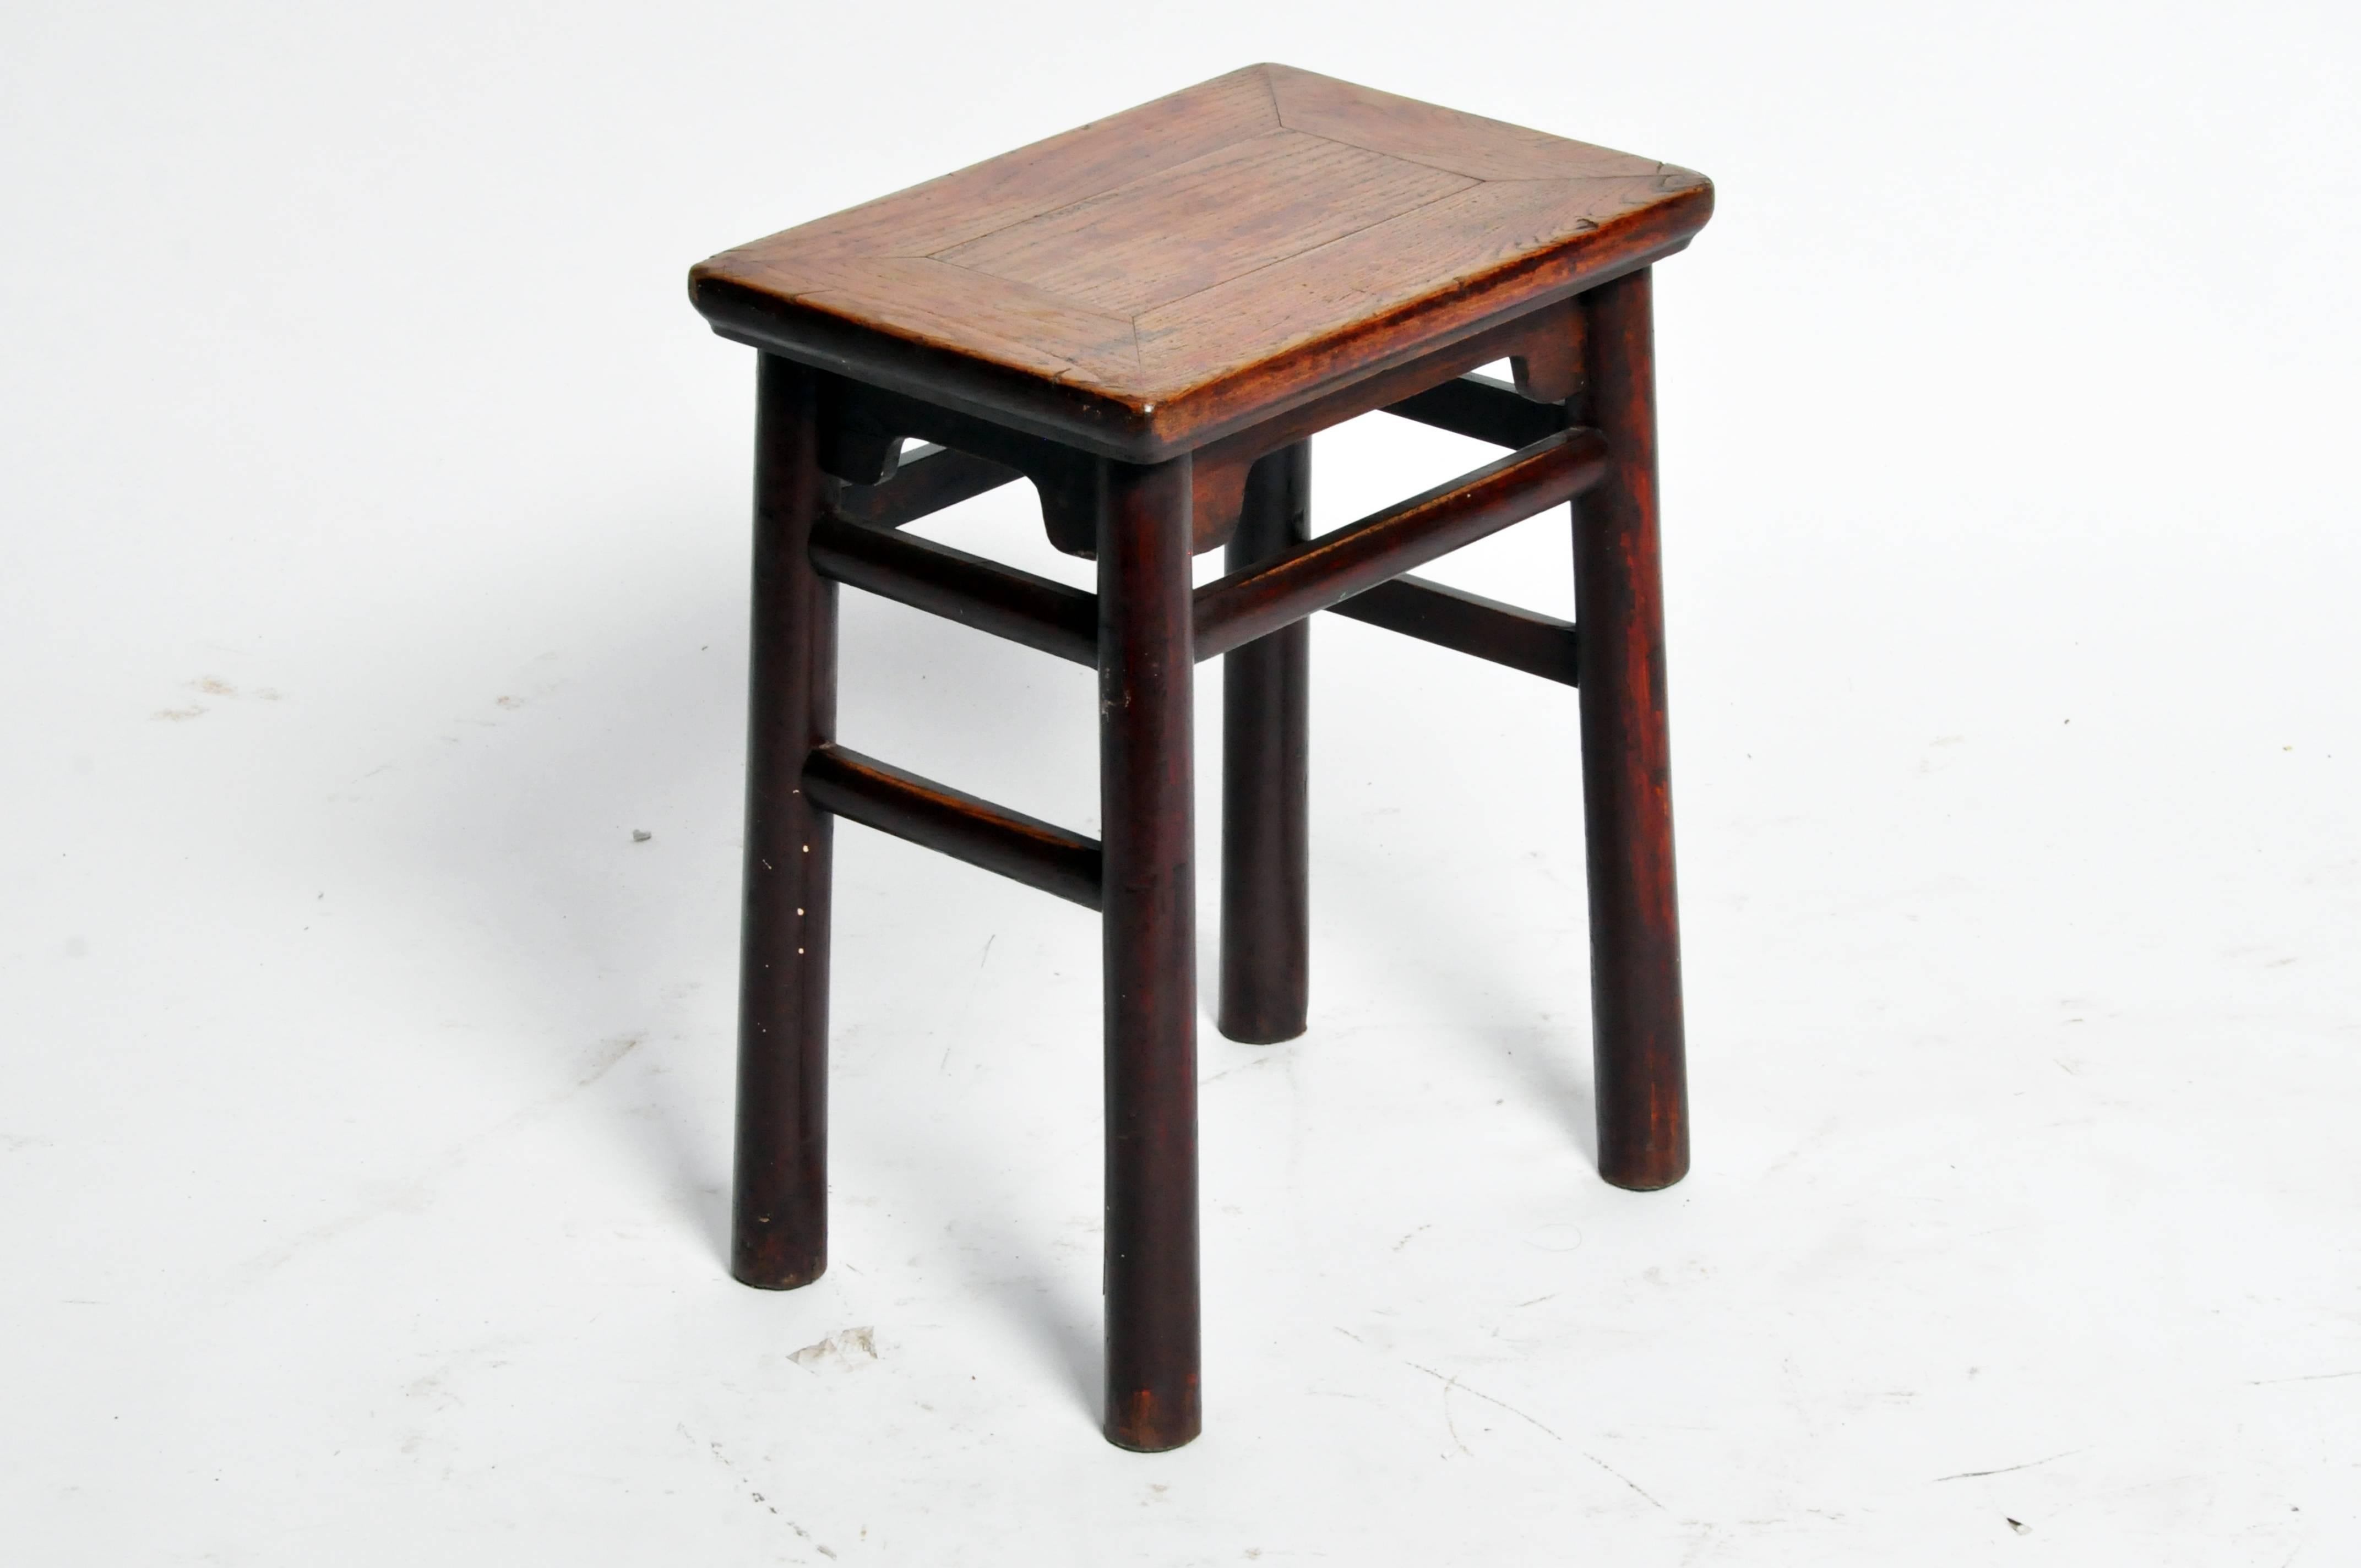 This handsome Qing dynasty Chinese stool is from Shandong, china and was made from elmwood. It features round posts designed, simple stretchers, and original lacquer.